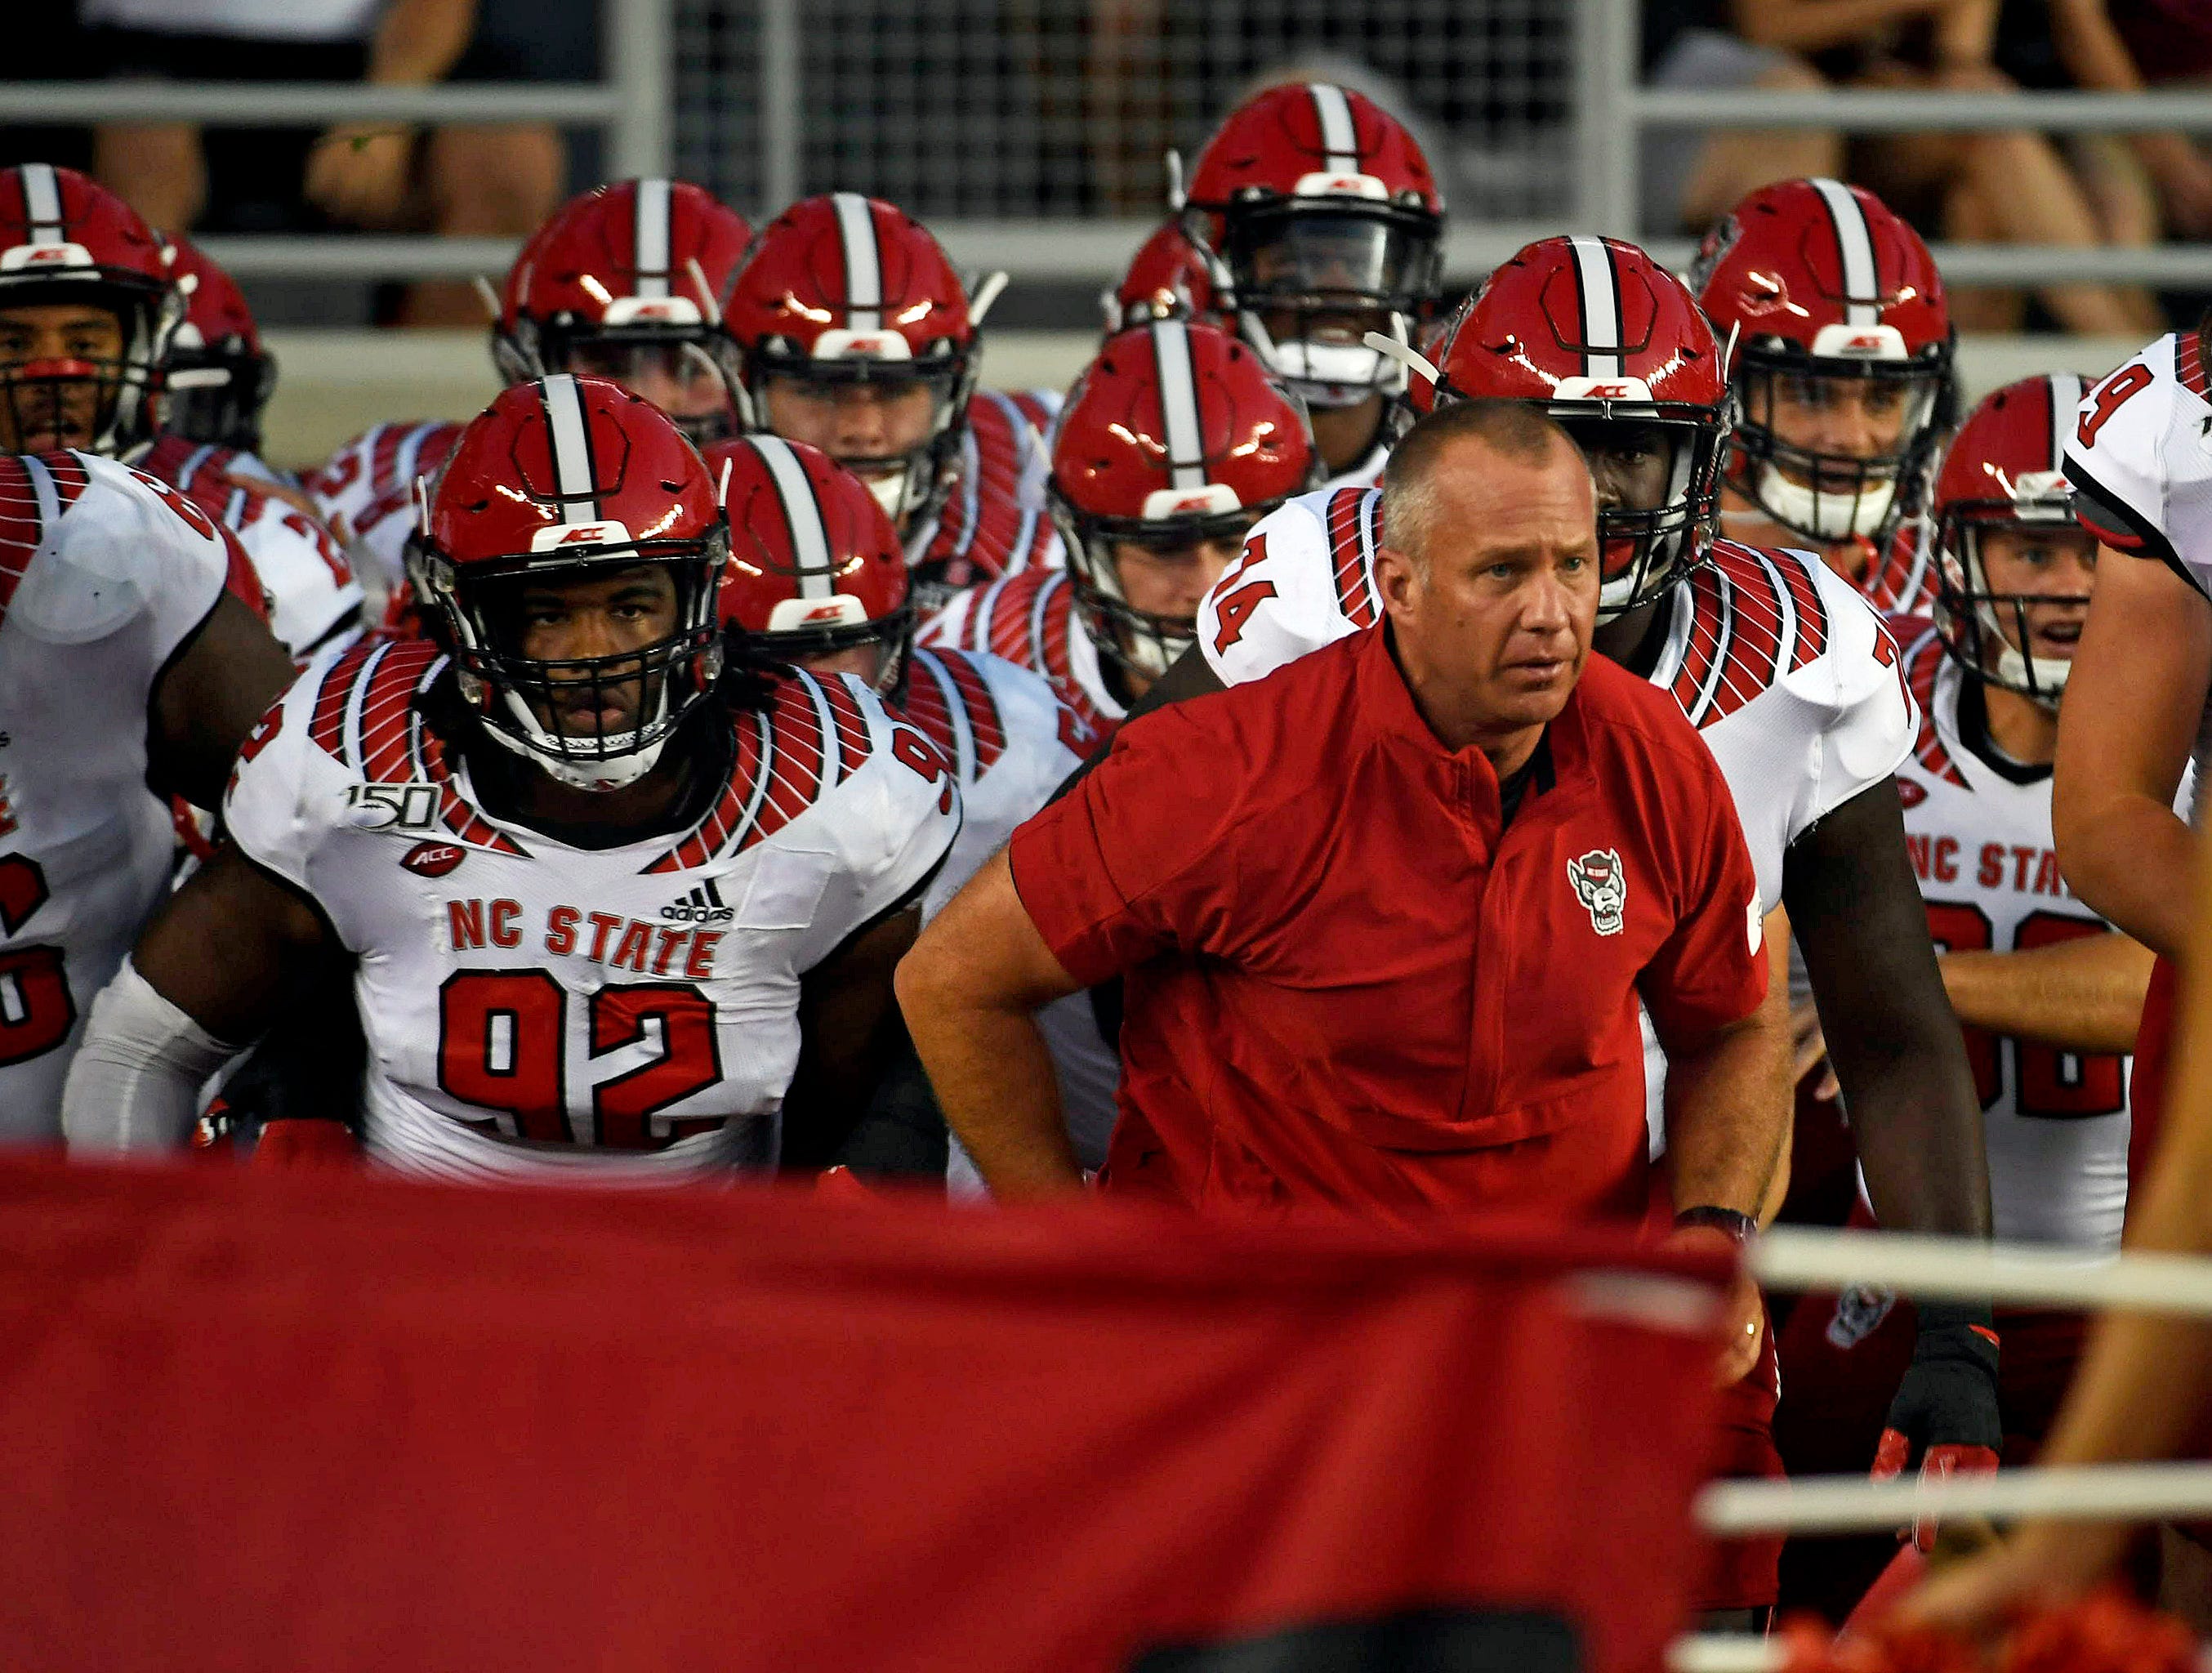 Sep 28, 2019; Tallahassee, FL, USA; North Carolina State Wolfpack head coach Dave Doeren with his team before the start of the game against the Florida State Seminoles at Doak Campbell Stadium. Mandatory Credit: Melina Myers-USA TODAY Sports